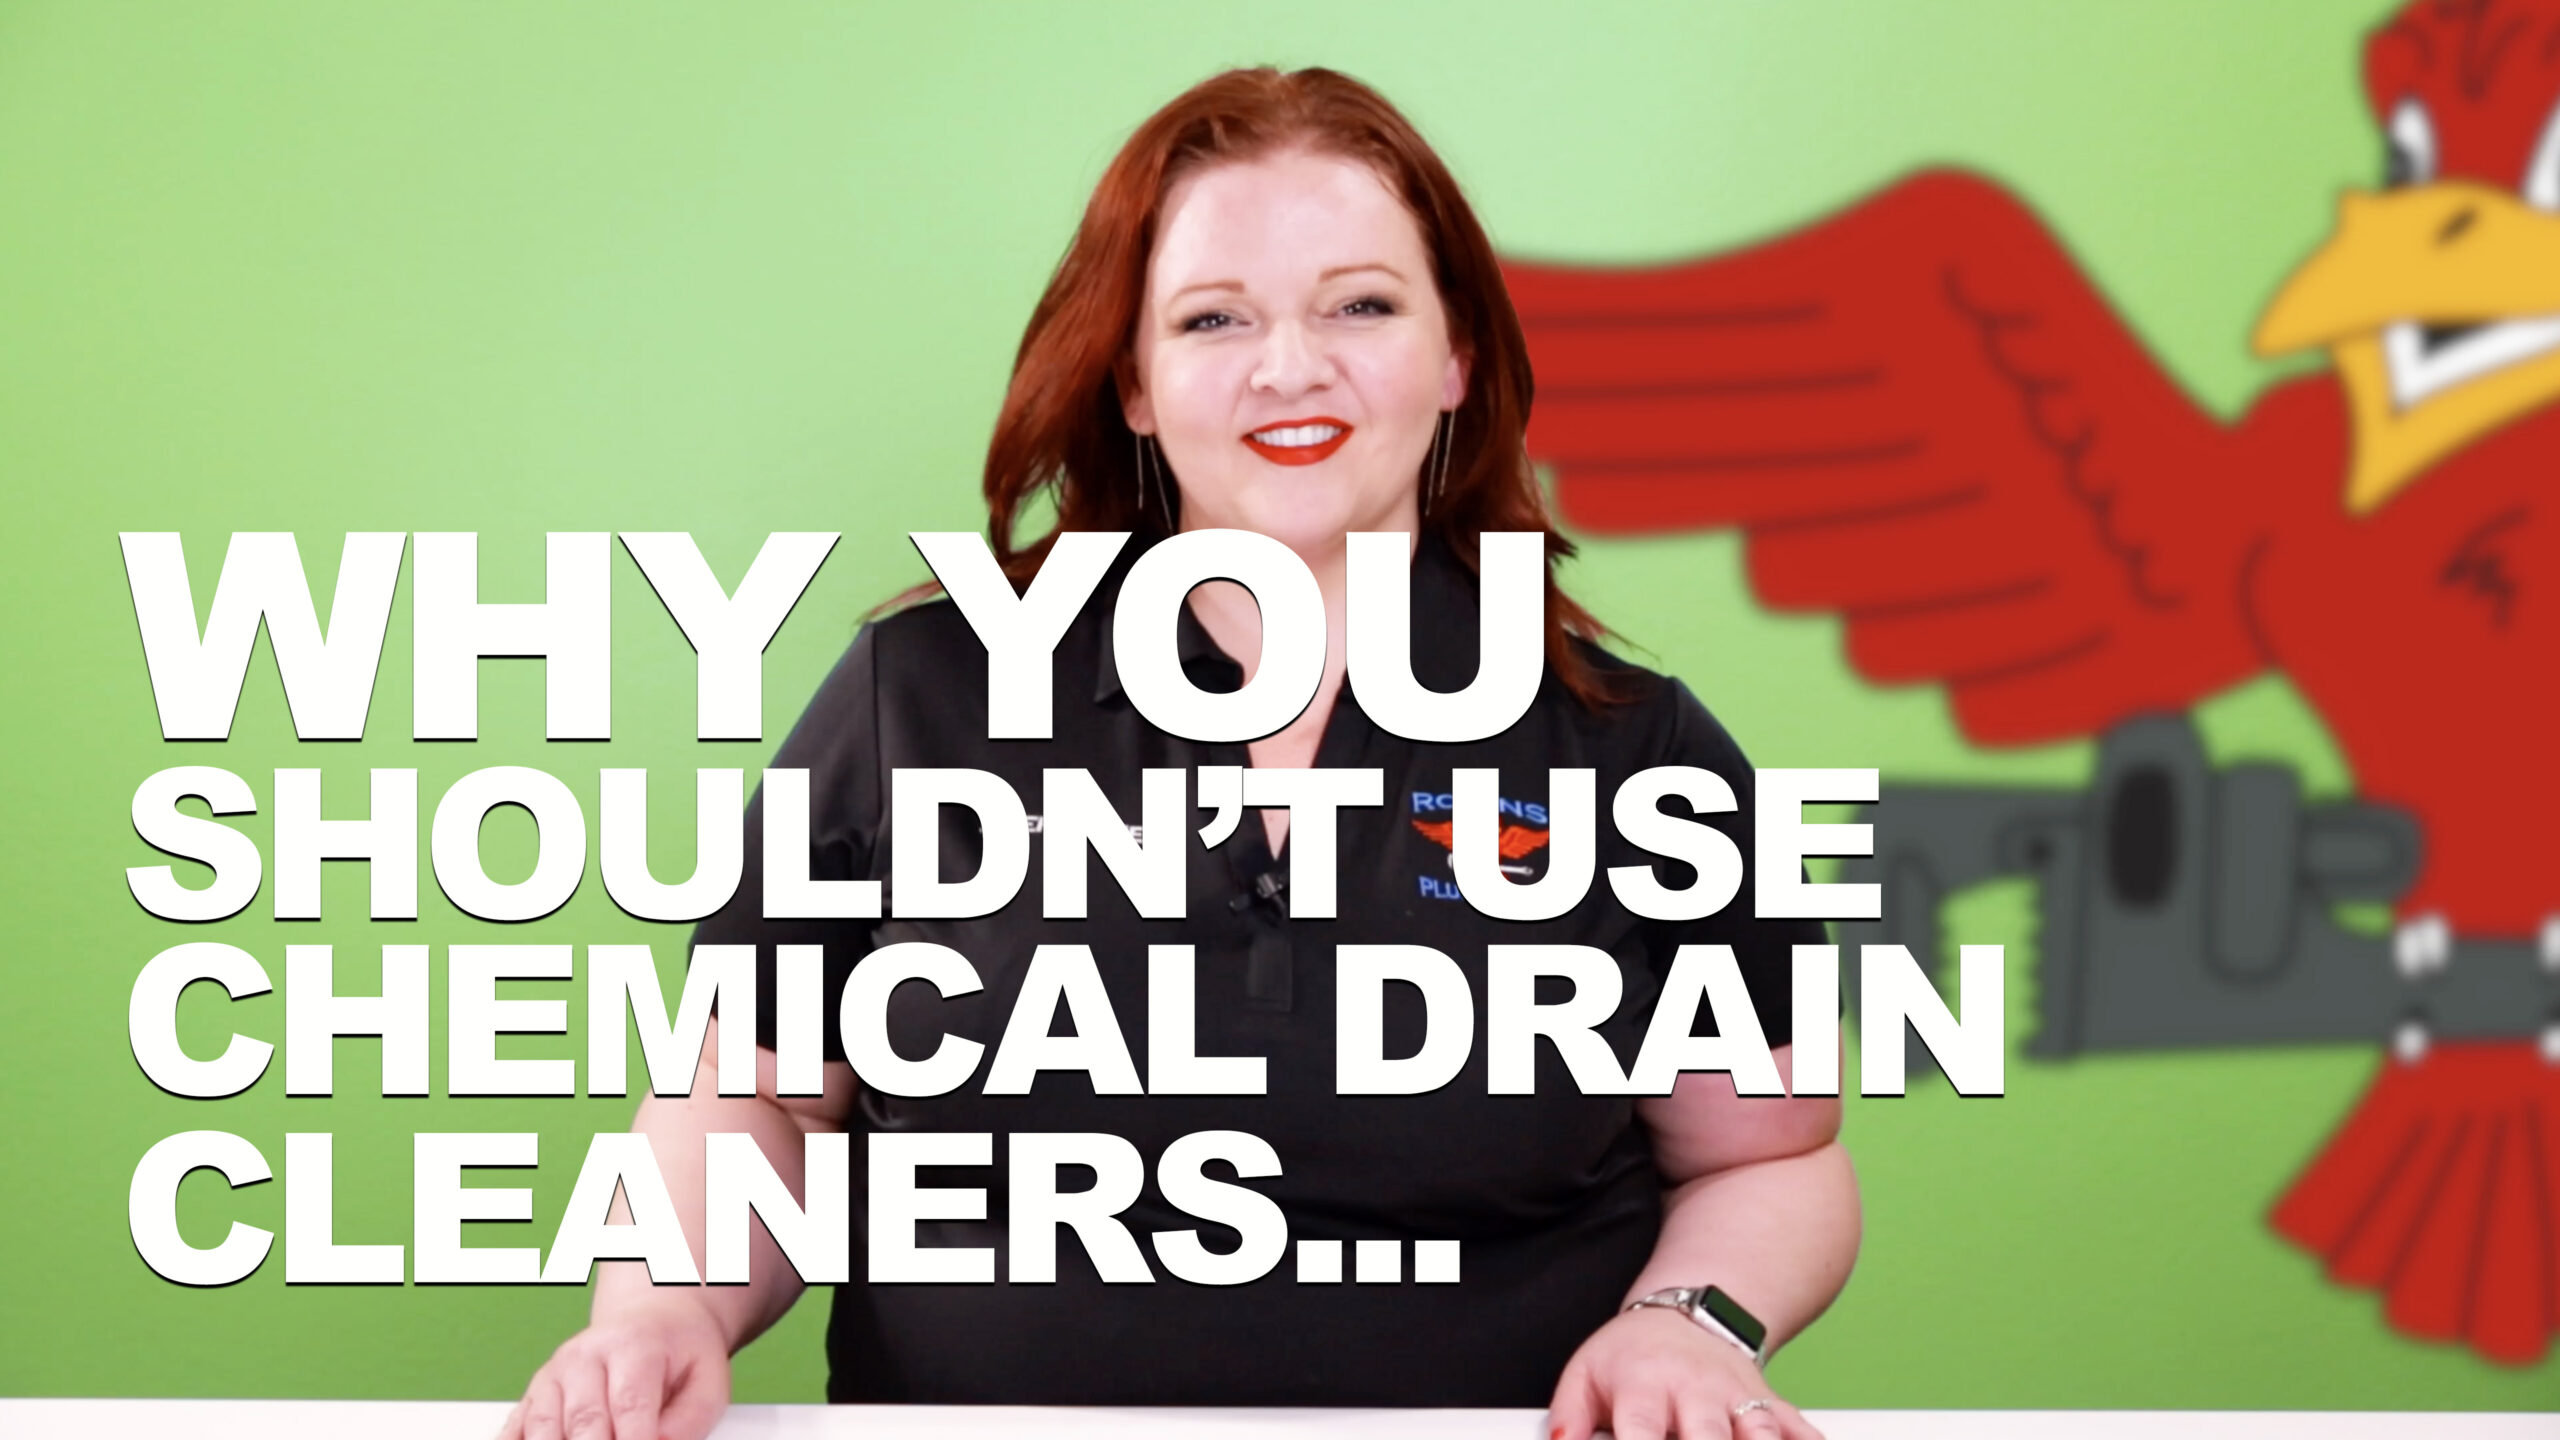 Cover photo for blog and video "Why You Shouldn't Use Chemical Drain Cleaners"